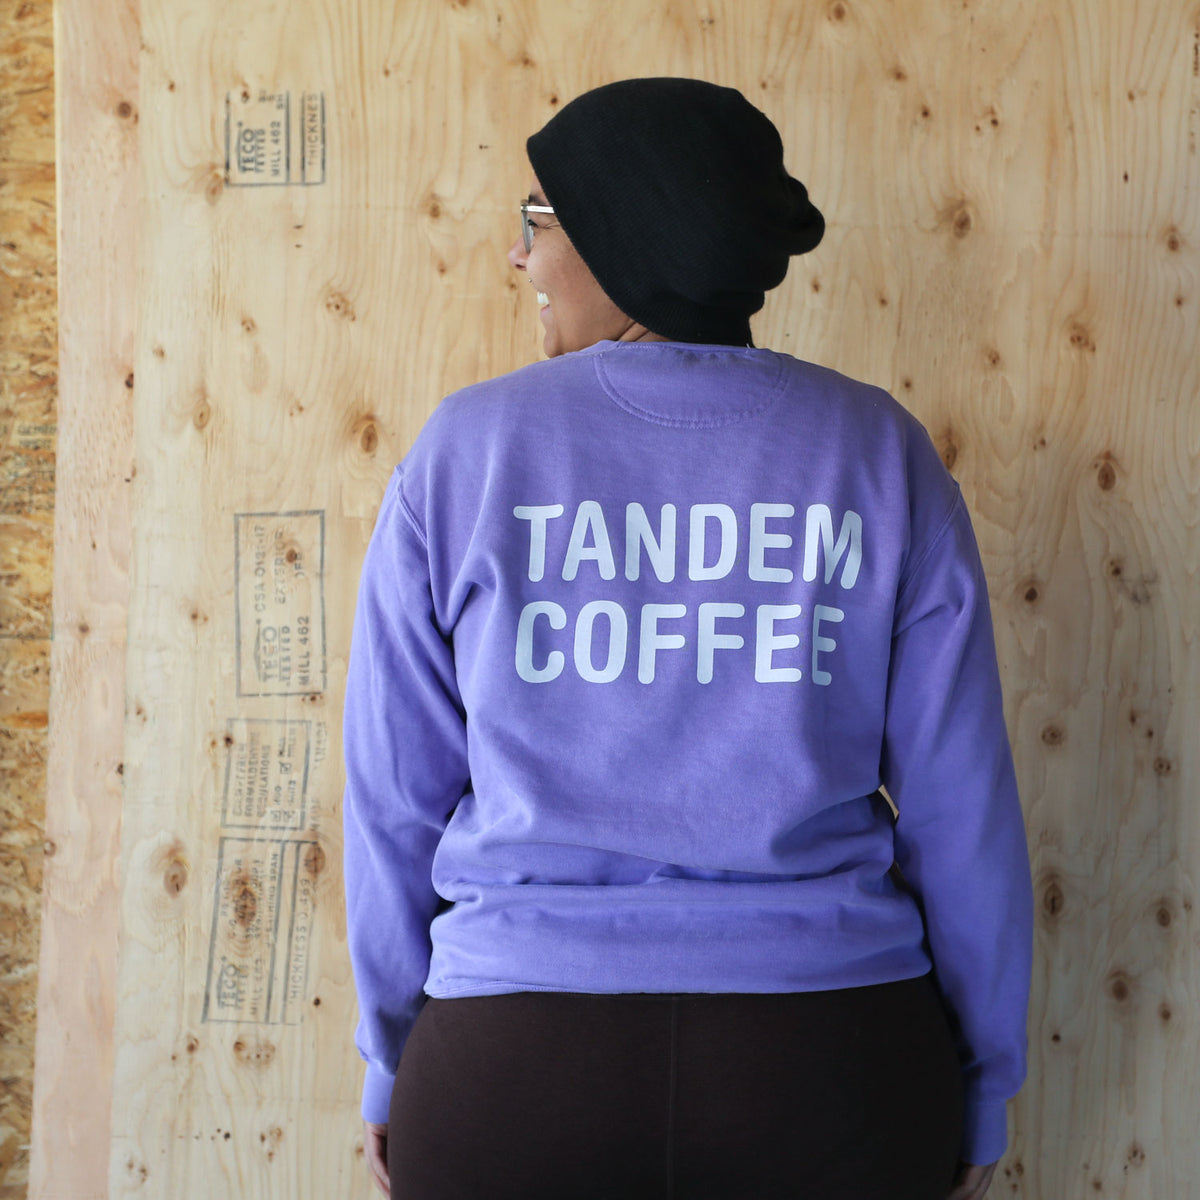 A person wearing a purple Tandem Coffee Roasters crewneck sweatshirt with "Tandem Coffee" printed on the back, facing a wooden plywood wall. The person is also wearing a black beanie and dark pants.